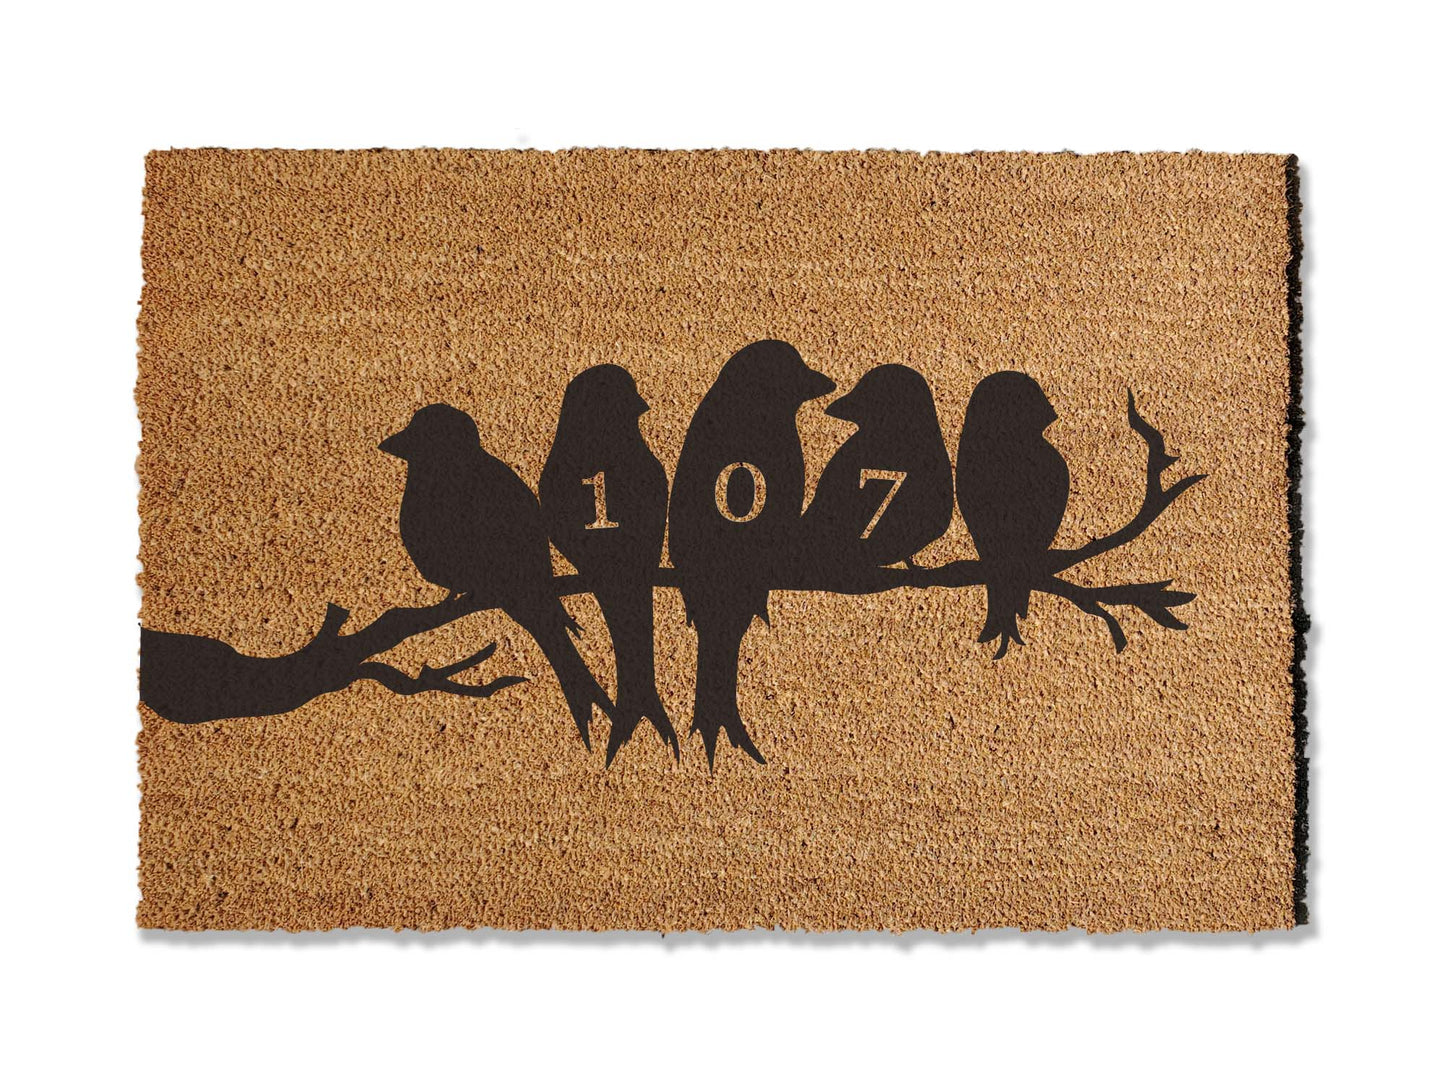 Personalized 1/2 inch thick coir doormat featuring a custom design of birds on a branch, with the option to add your house numbers on the birds. This unique mat not only adds a personalized touch to your entryway but also excels at trapping dirt, enhancing both style and functionality.